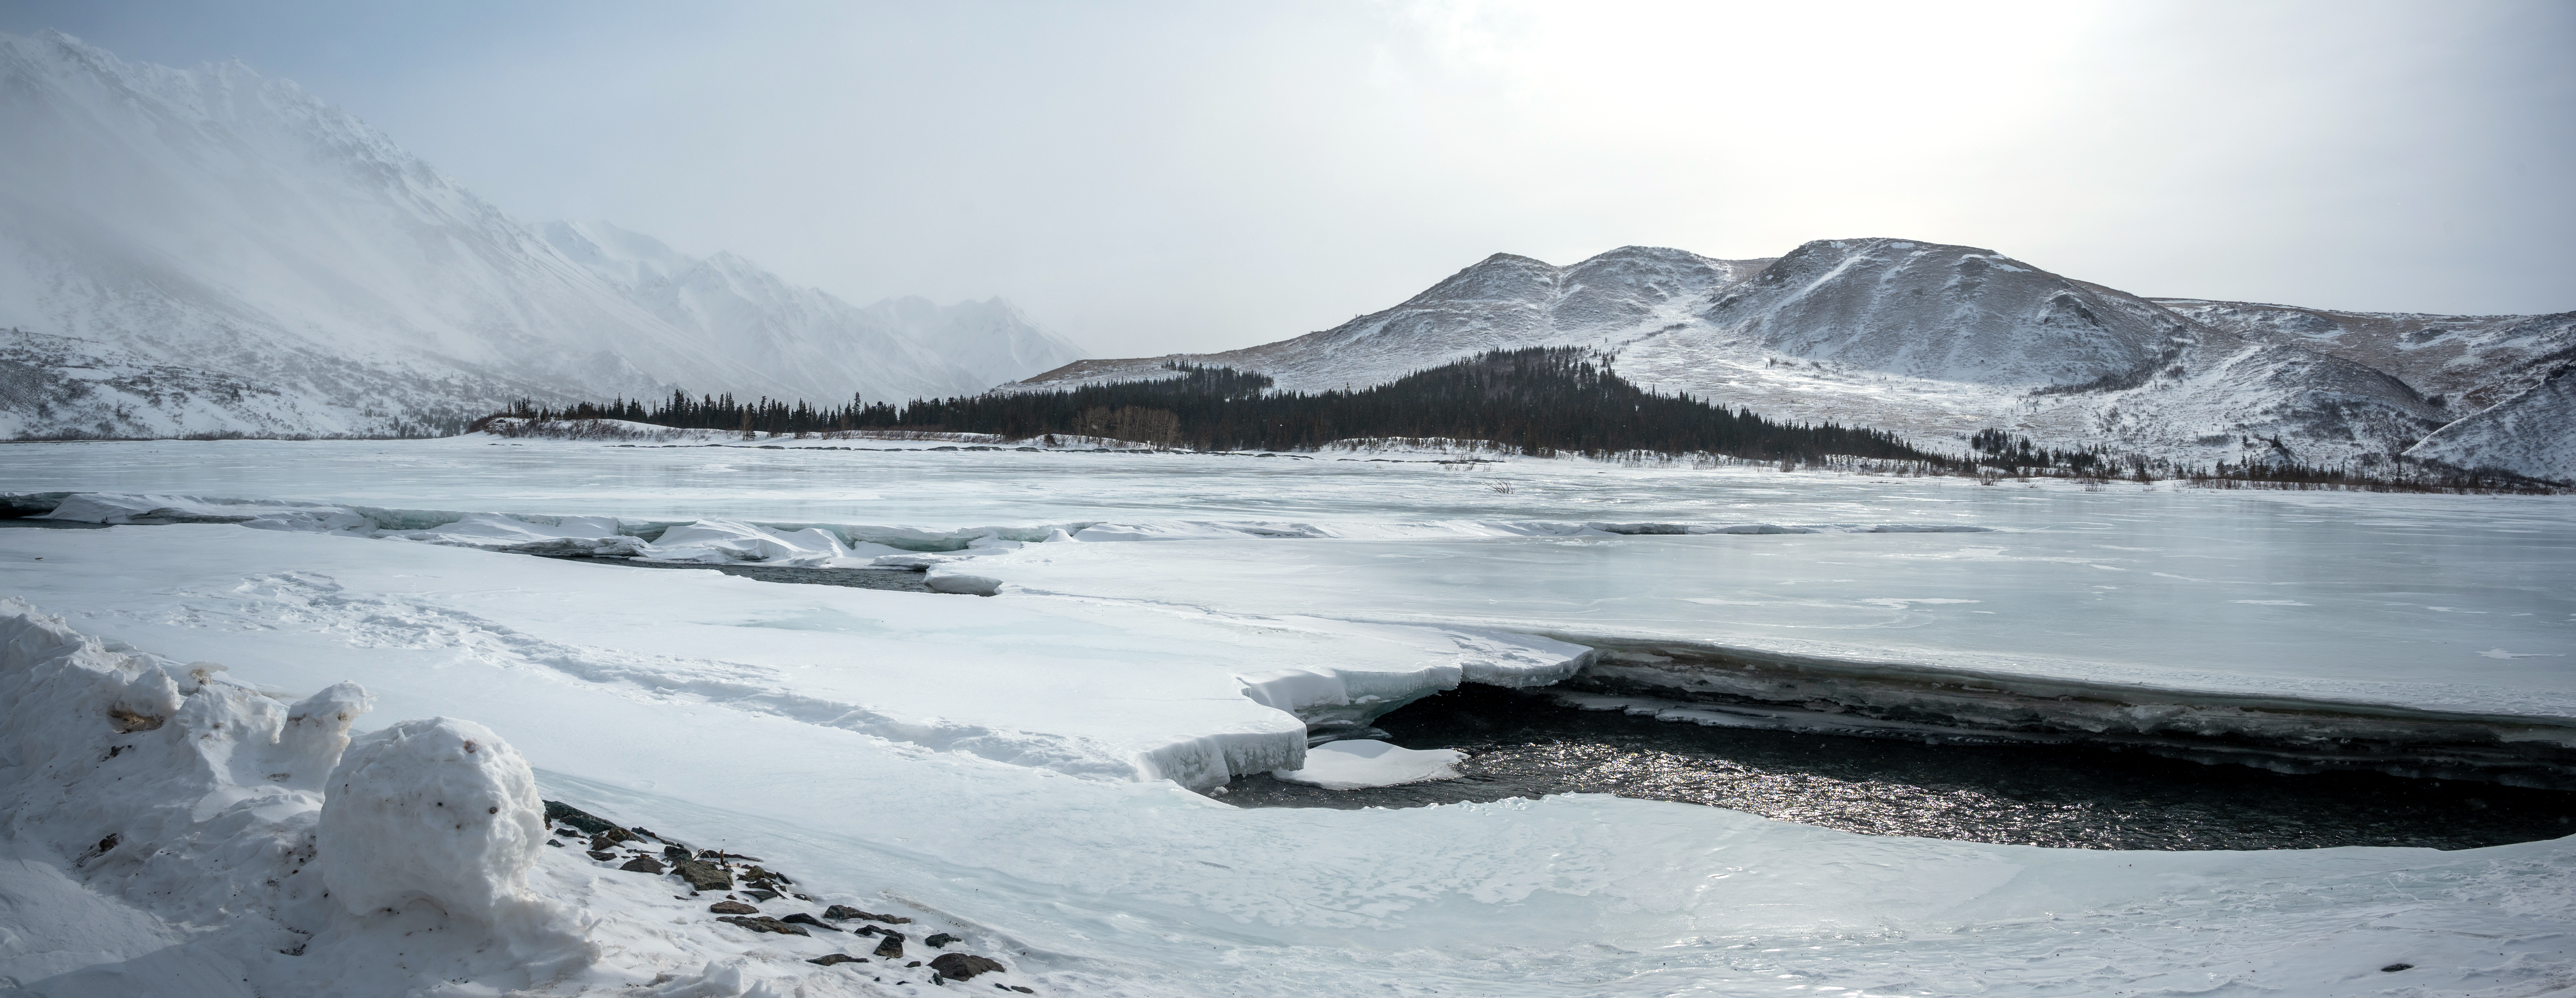 a frozen river with a hole in the ice, with snowy mountains in the background